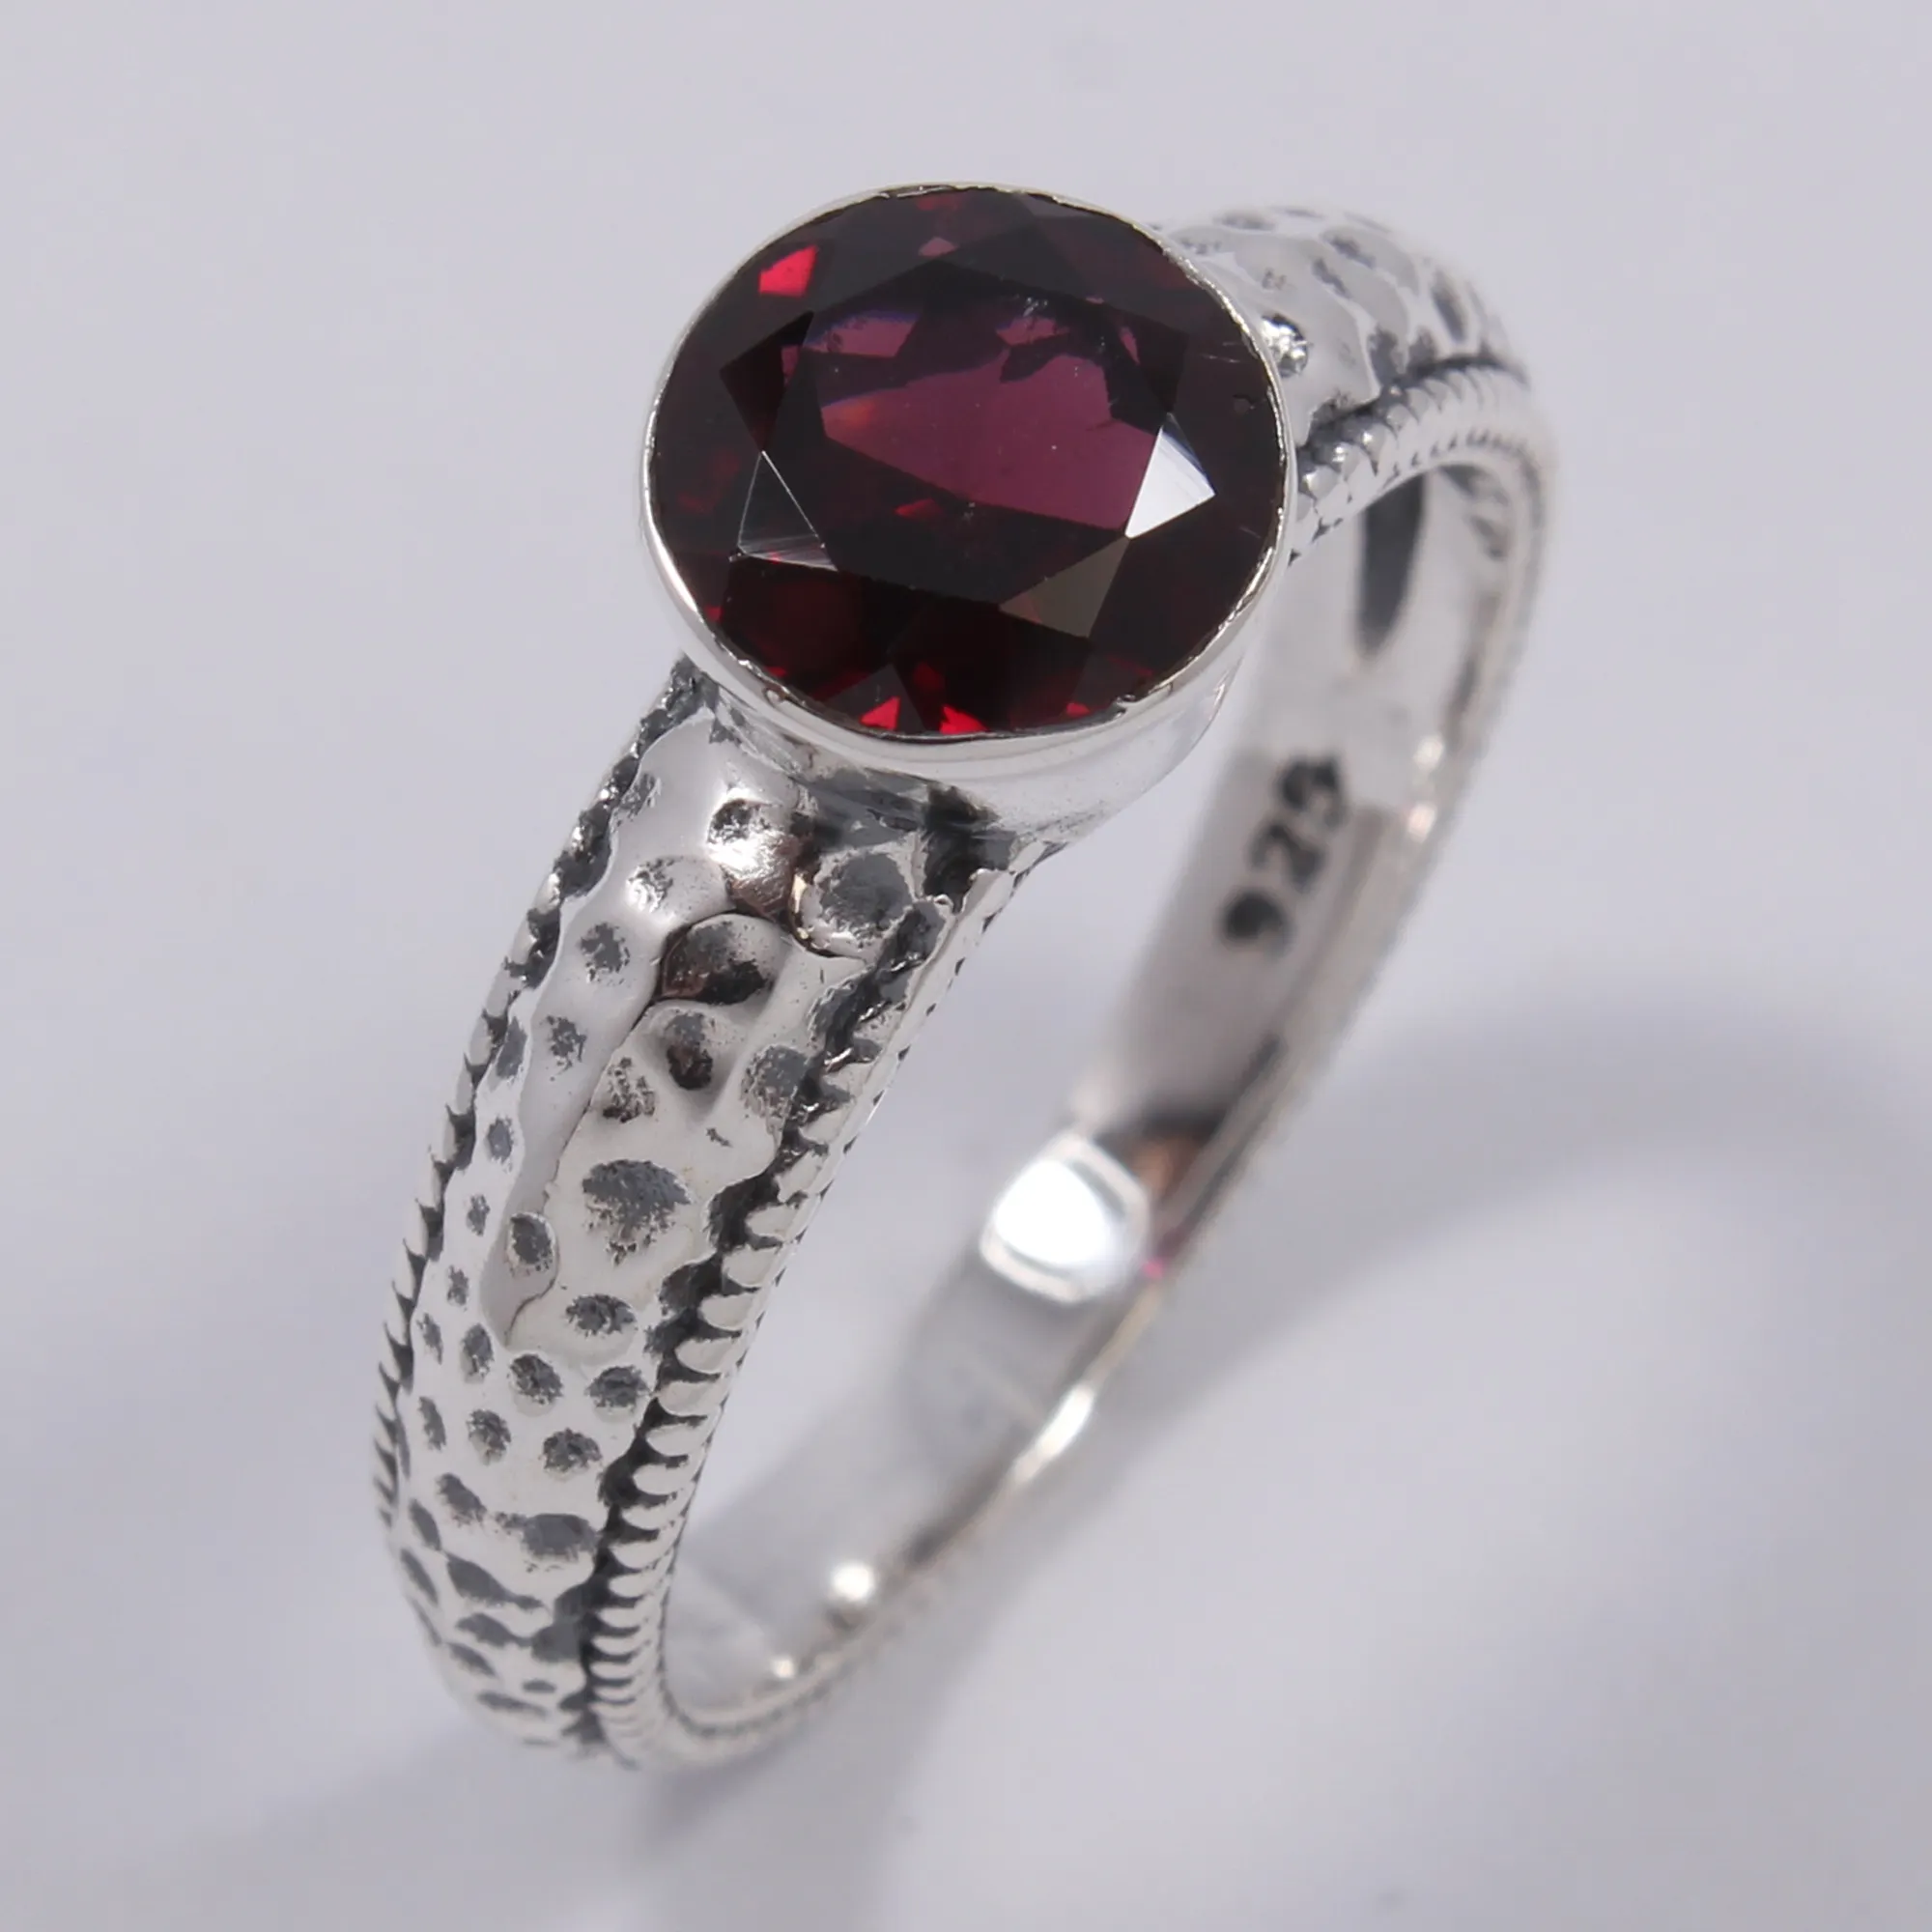 Silver Plated Beautiful Red Garnet 6 MM Round Faceted Handmade Gemstone Ring 925 Solid Silver Wedding Engagement Ring